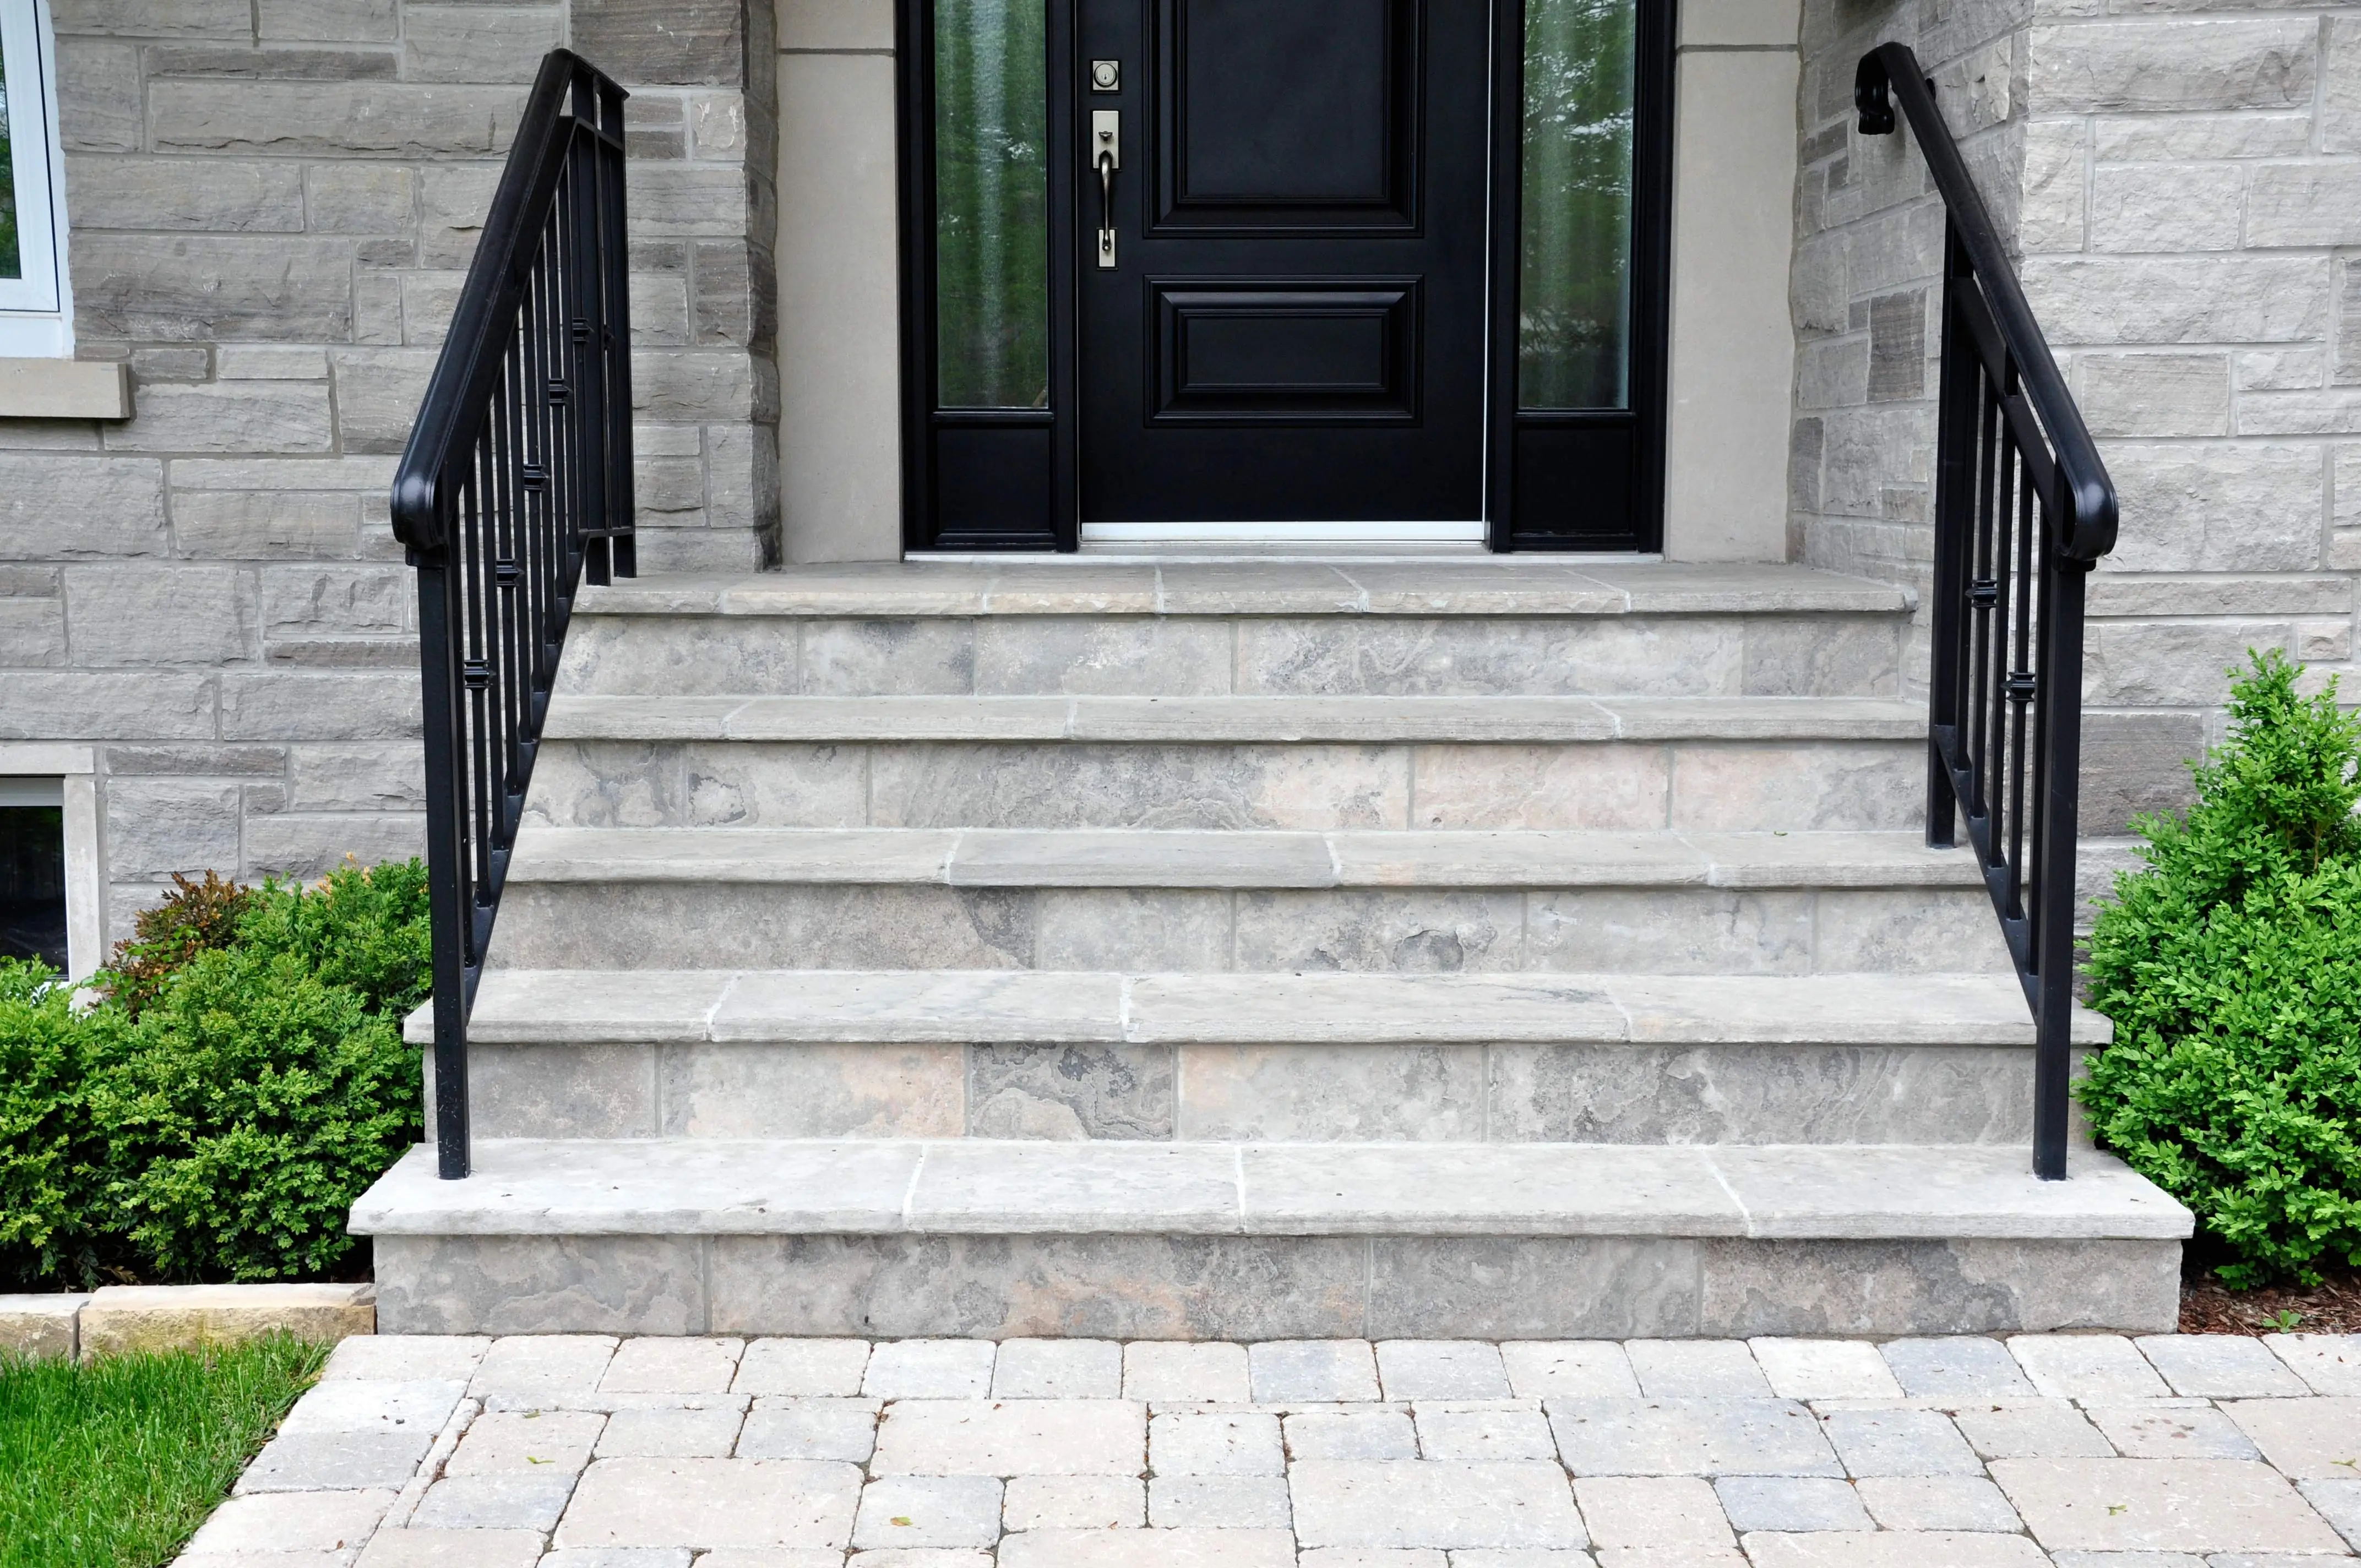 Newly constructed stone steps with black metal railings leading to a front door in Germantown.